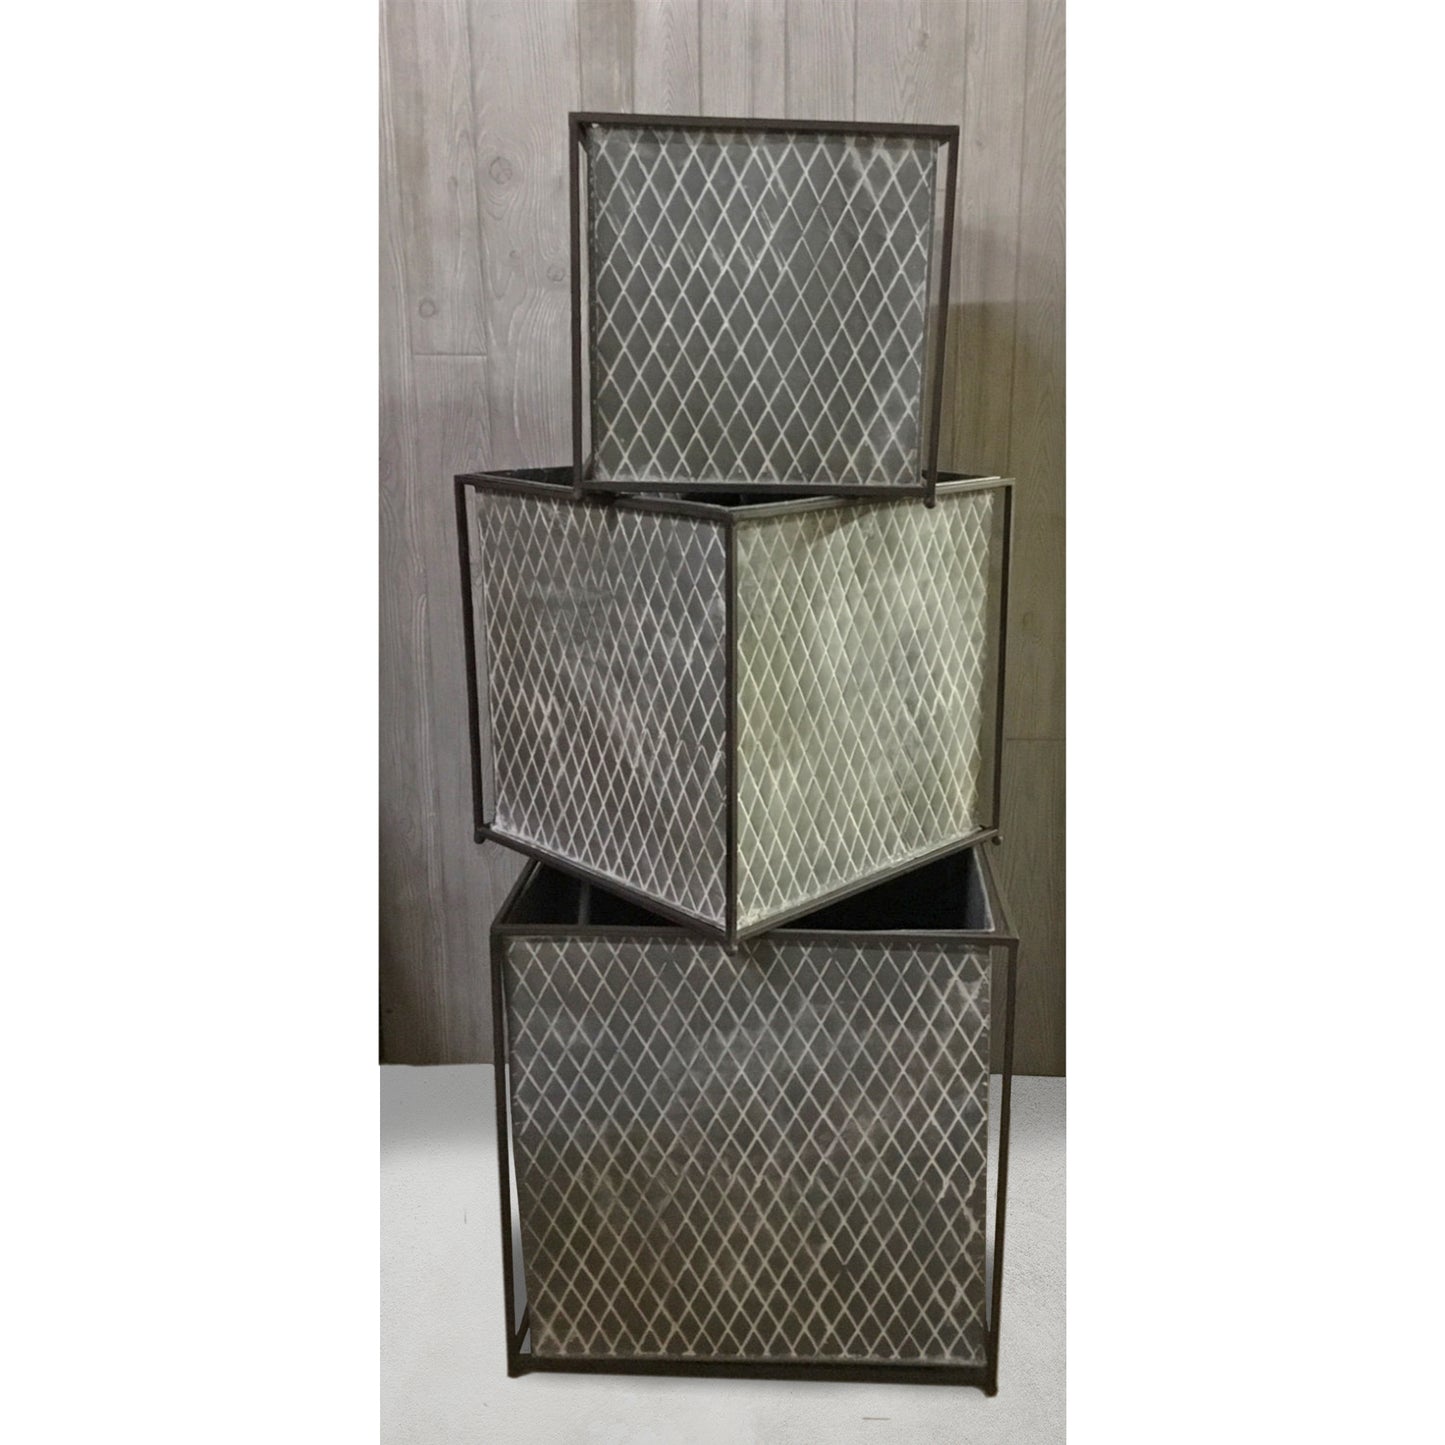 Square Quilted Galvanized Metal Planter, 3 sizes